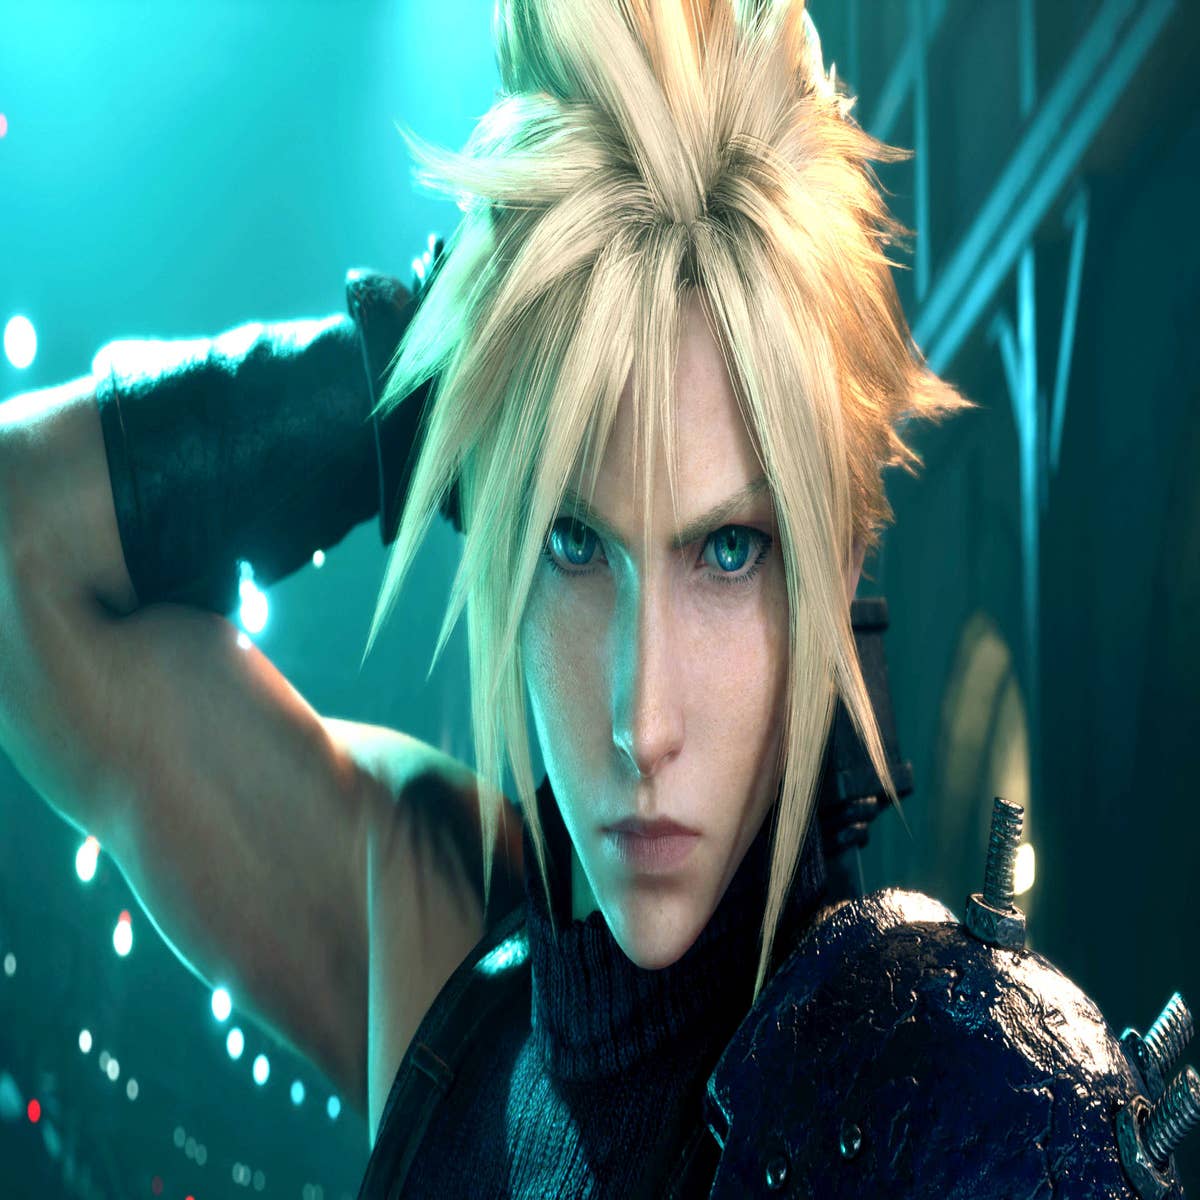 Final Fantasy 7 Rebirth: accomplished and impressive but not above  criticism